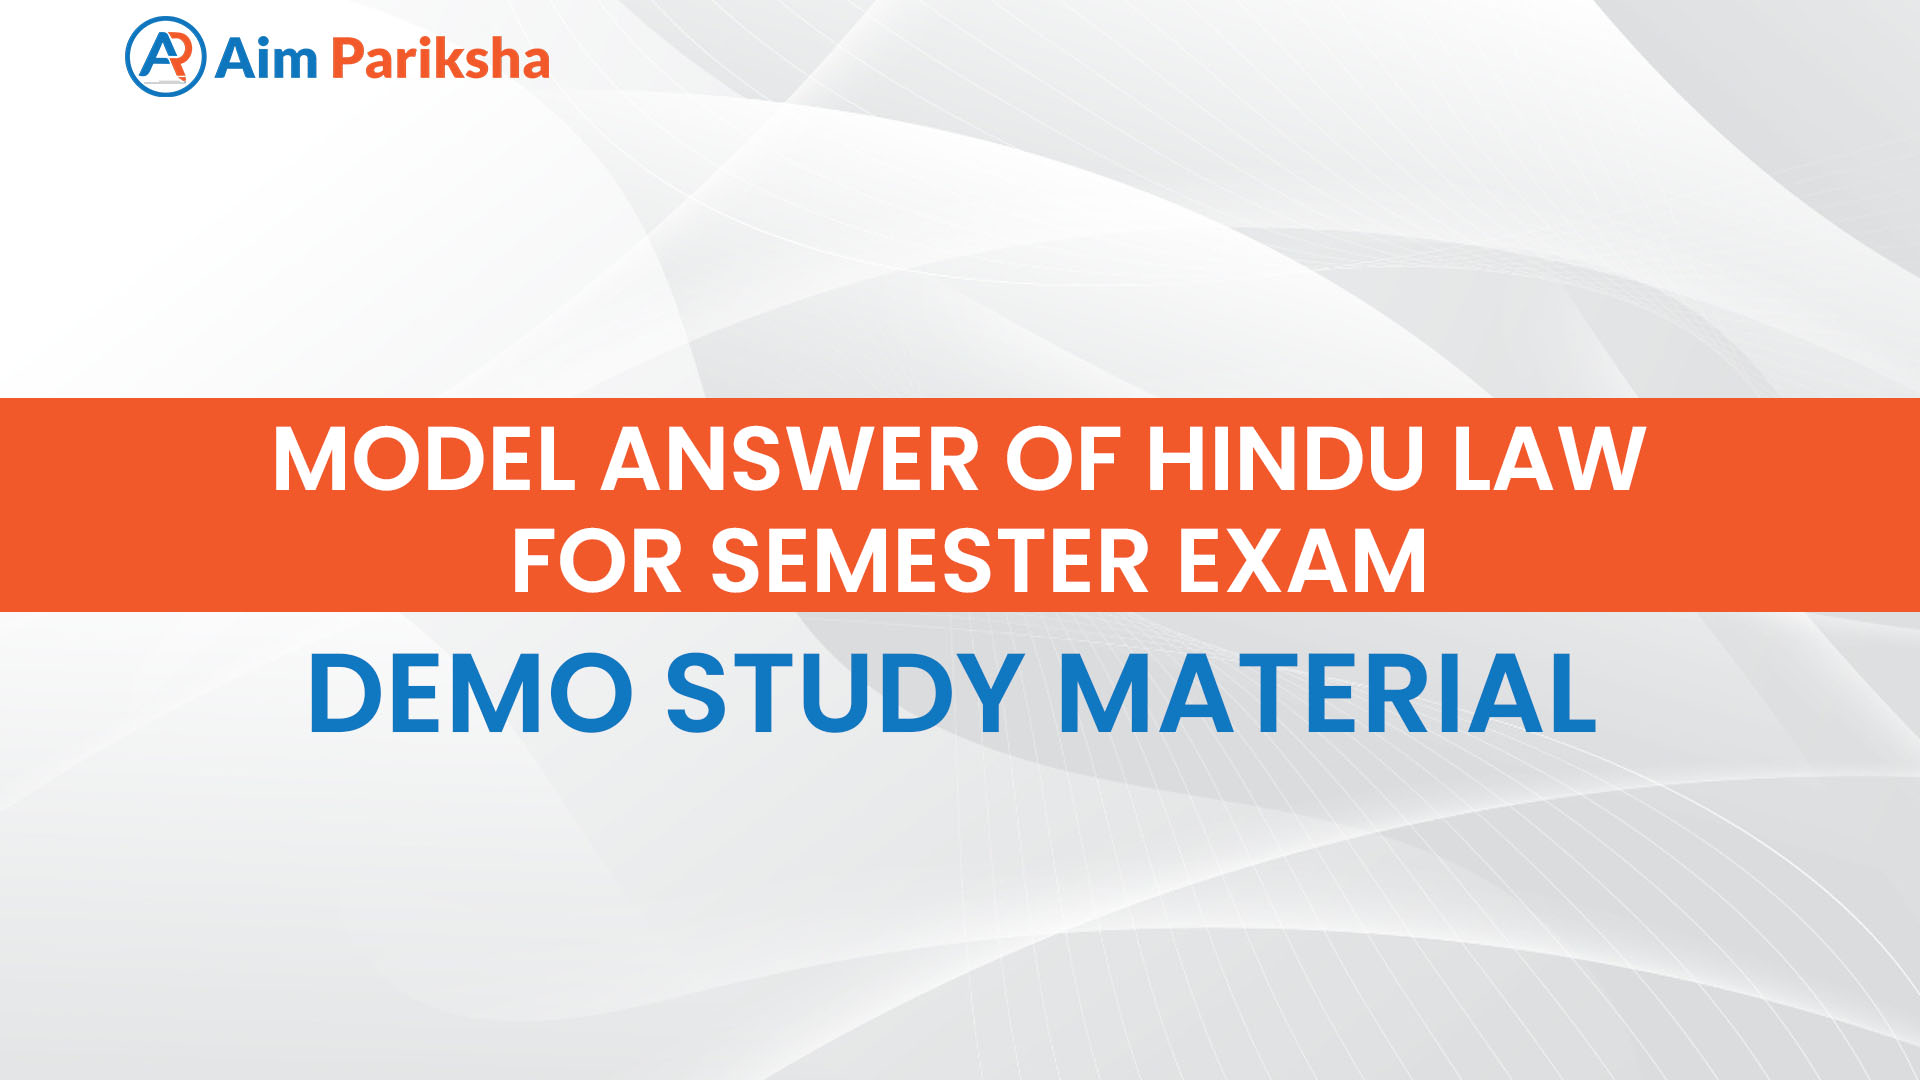 Model answer of Hindu law for Semester exam